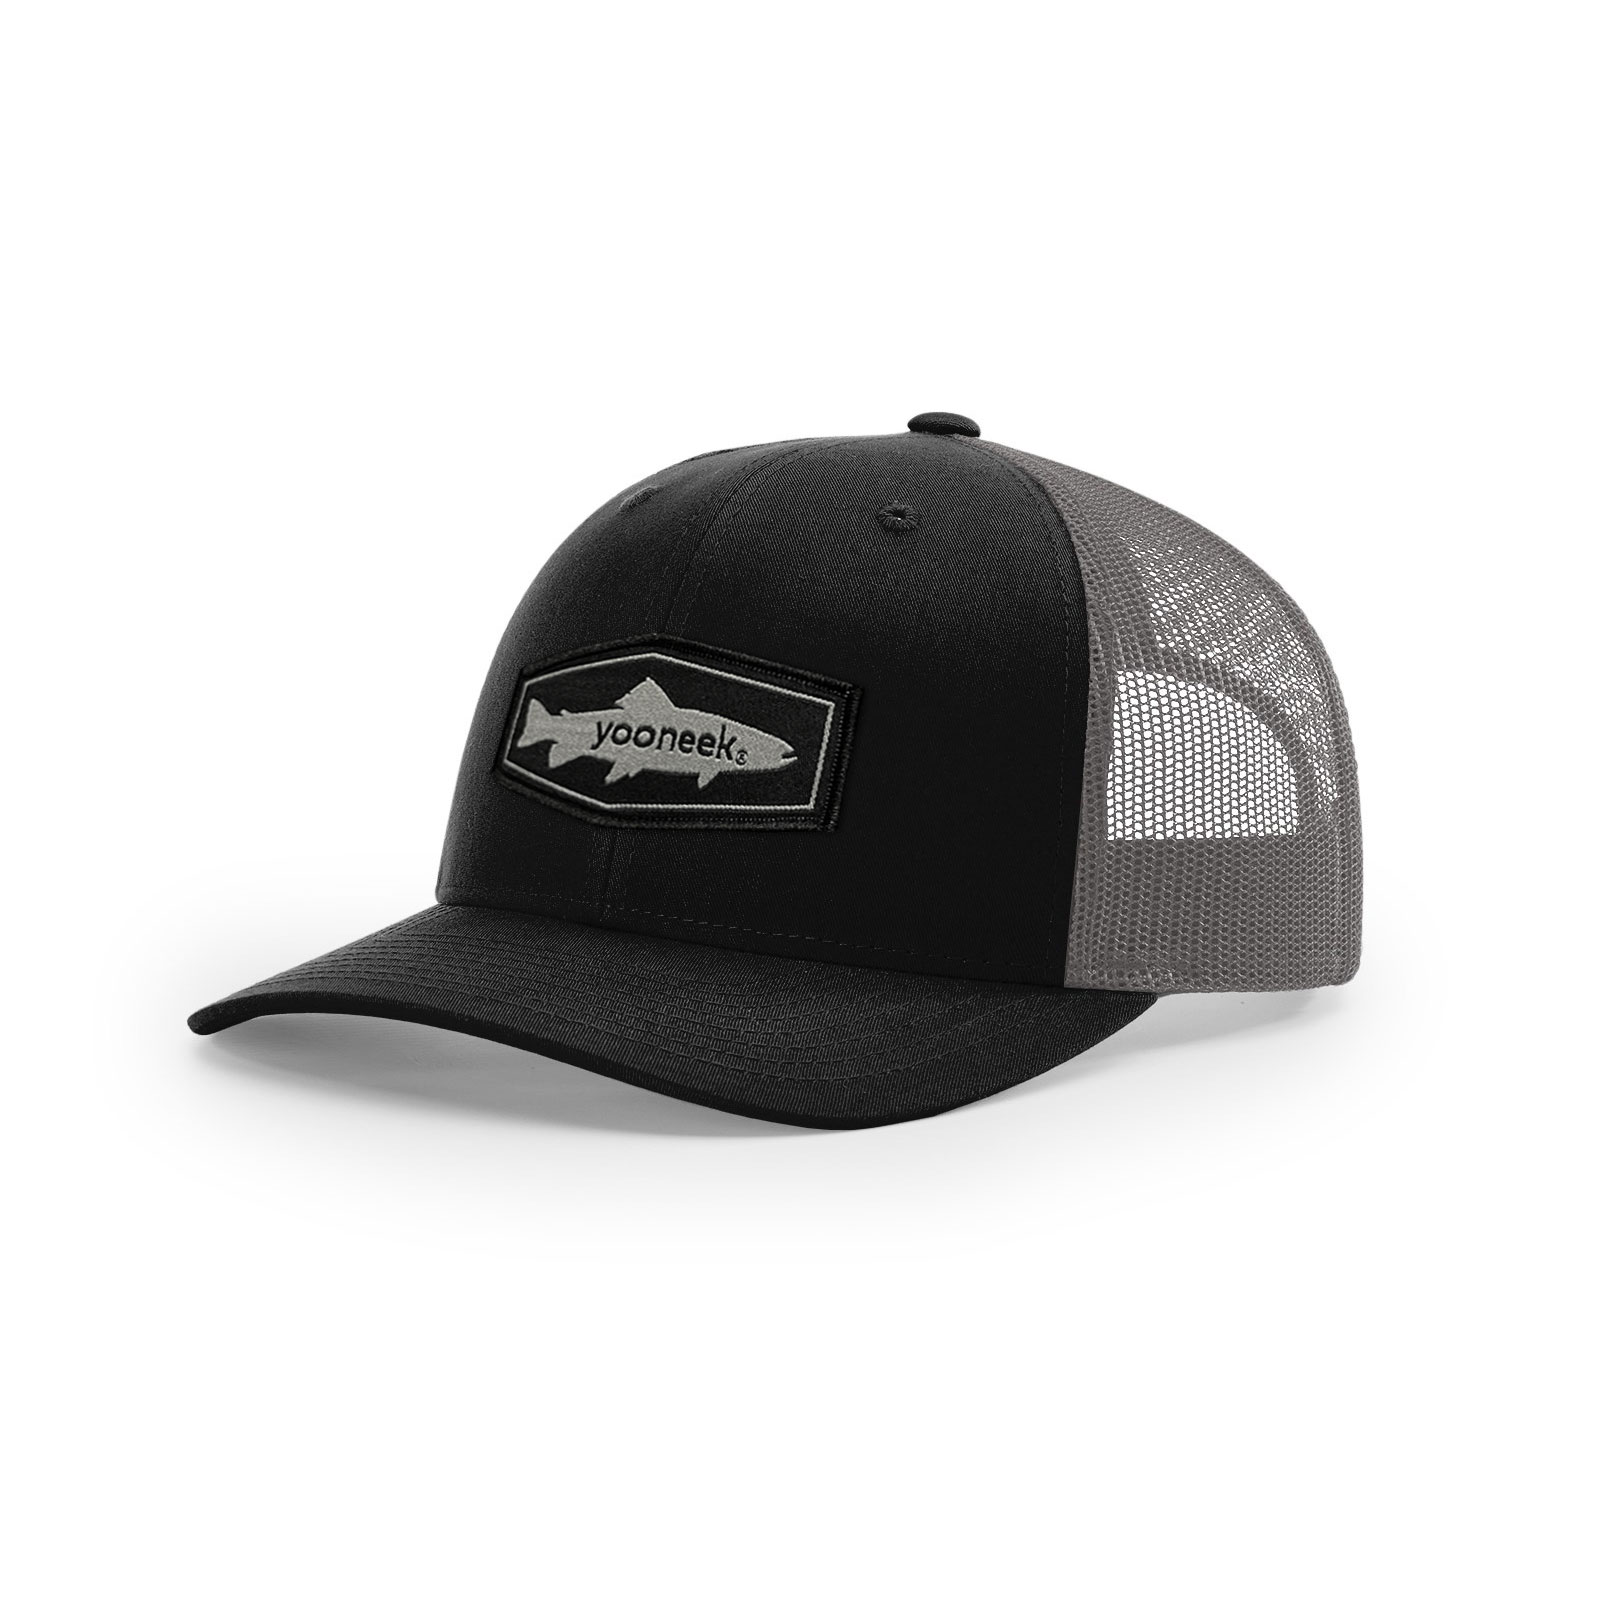 BASS SQUARE HAT - 935 ROGUE | Yooneek Products